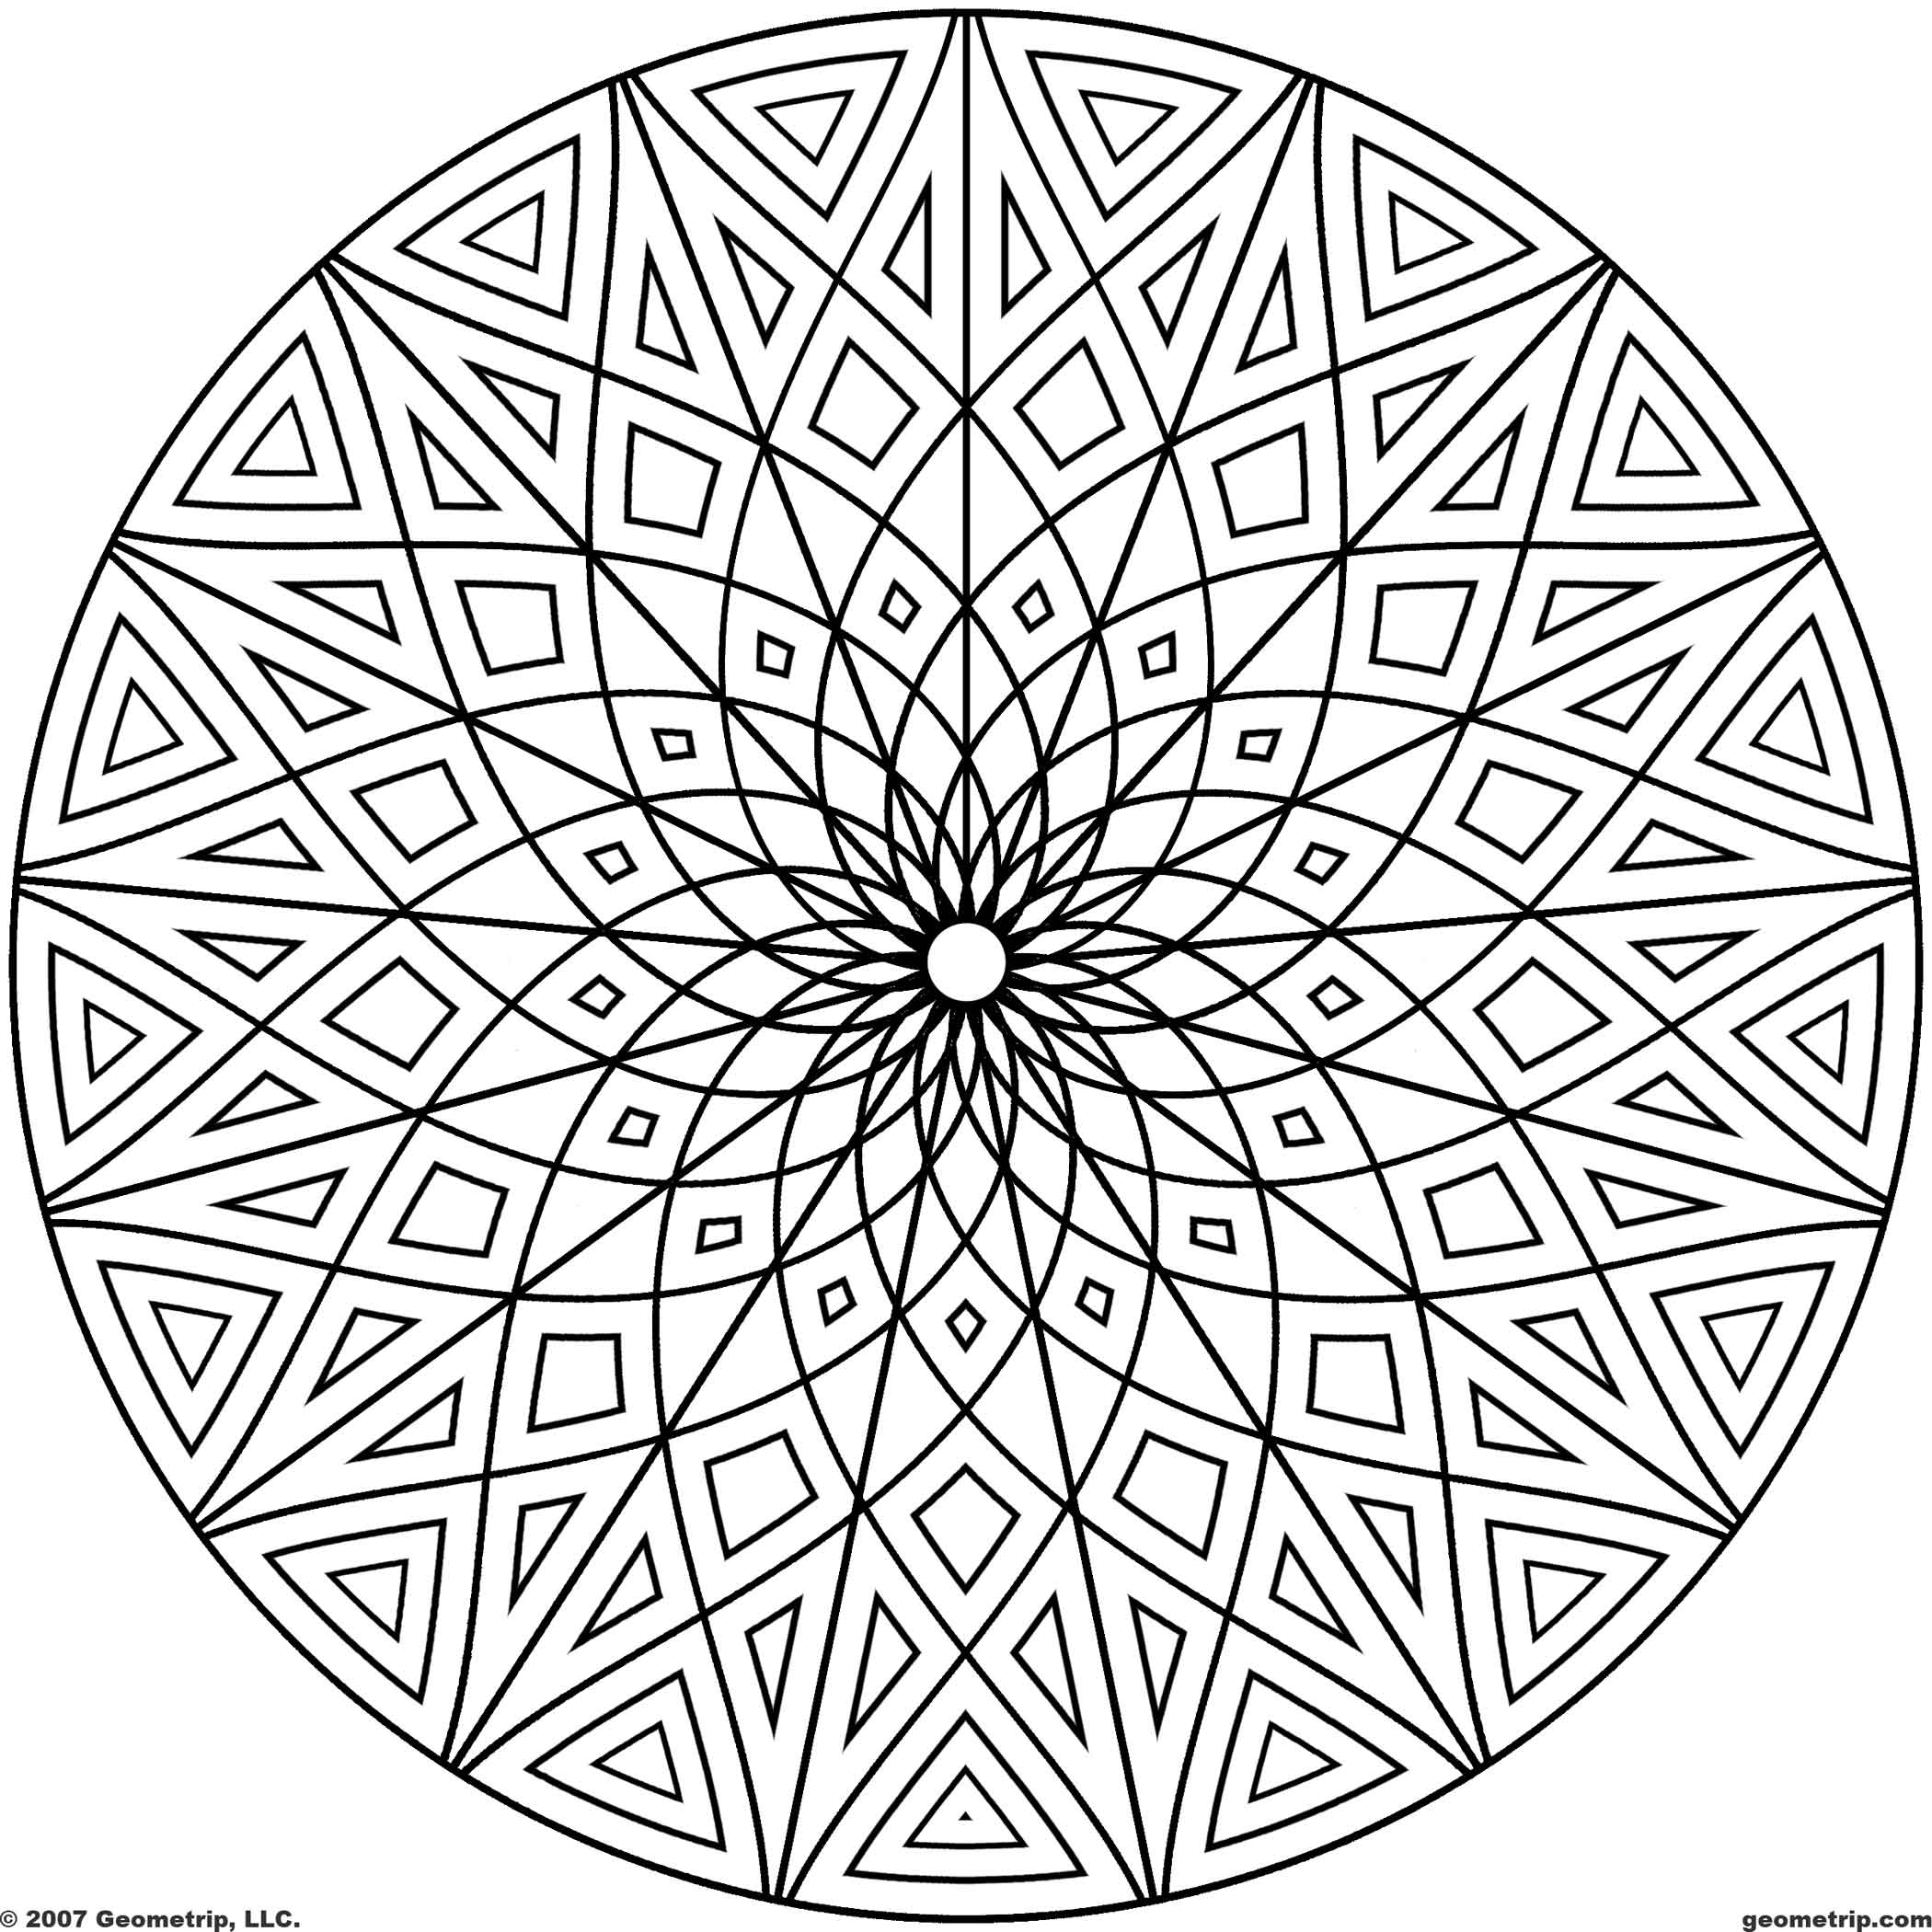 Printable Mandalas Designs Coloring Pages with Design Coloring ...